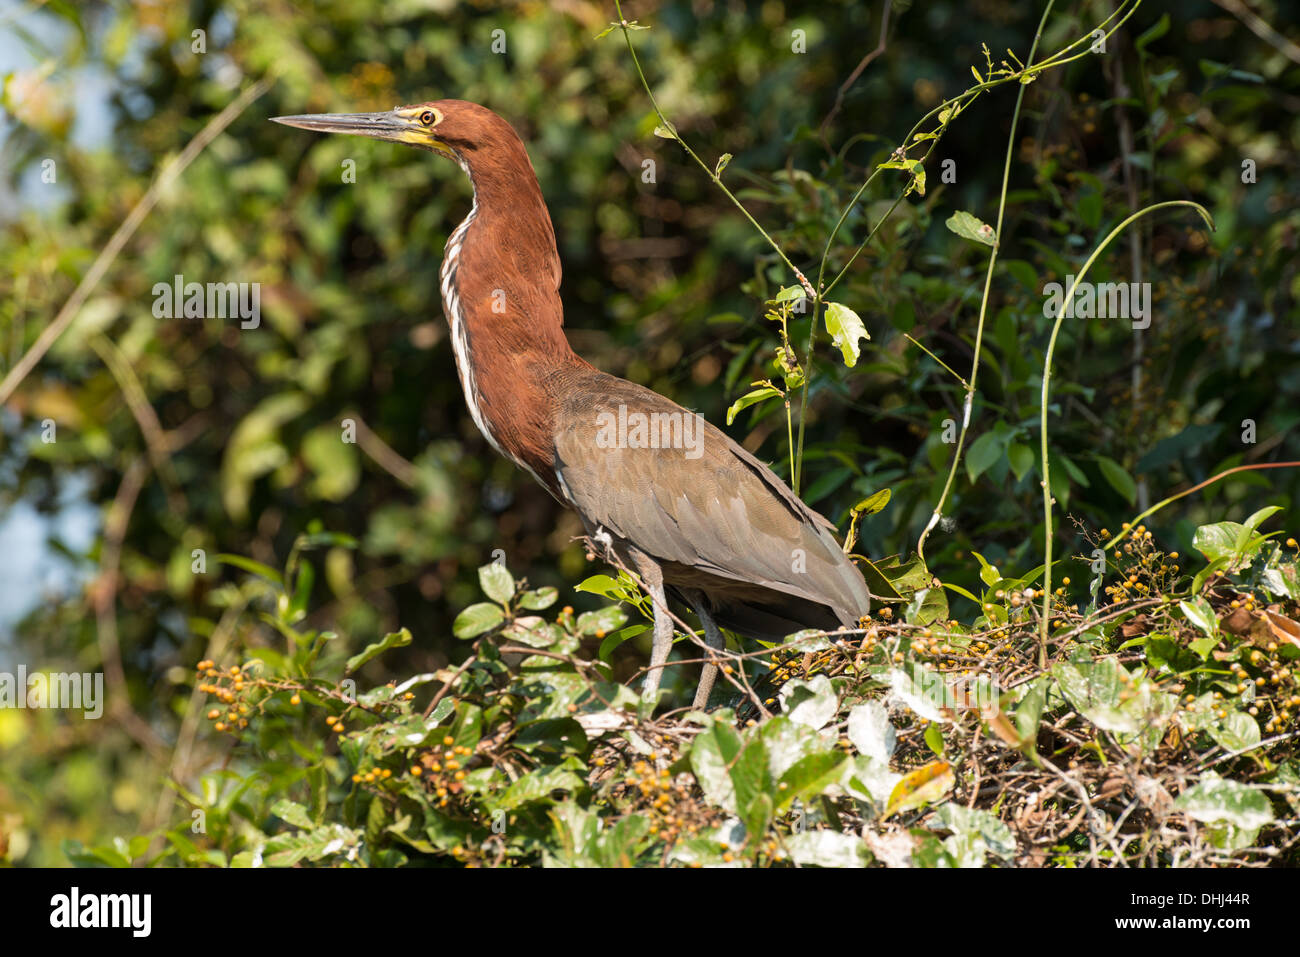 Stock photo of a rufescent tiger heron in a tree. Stock Photo